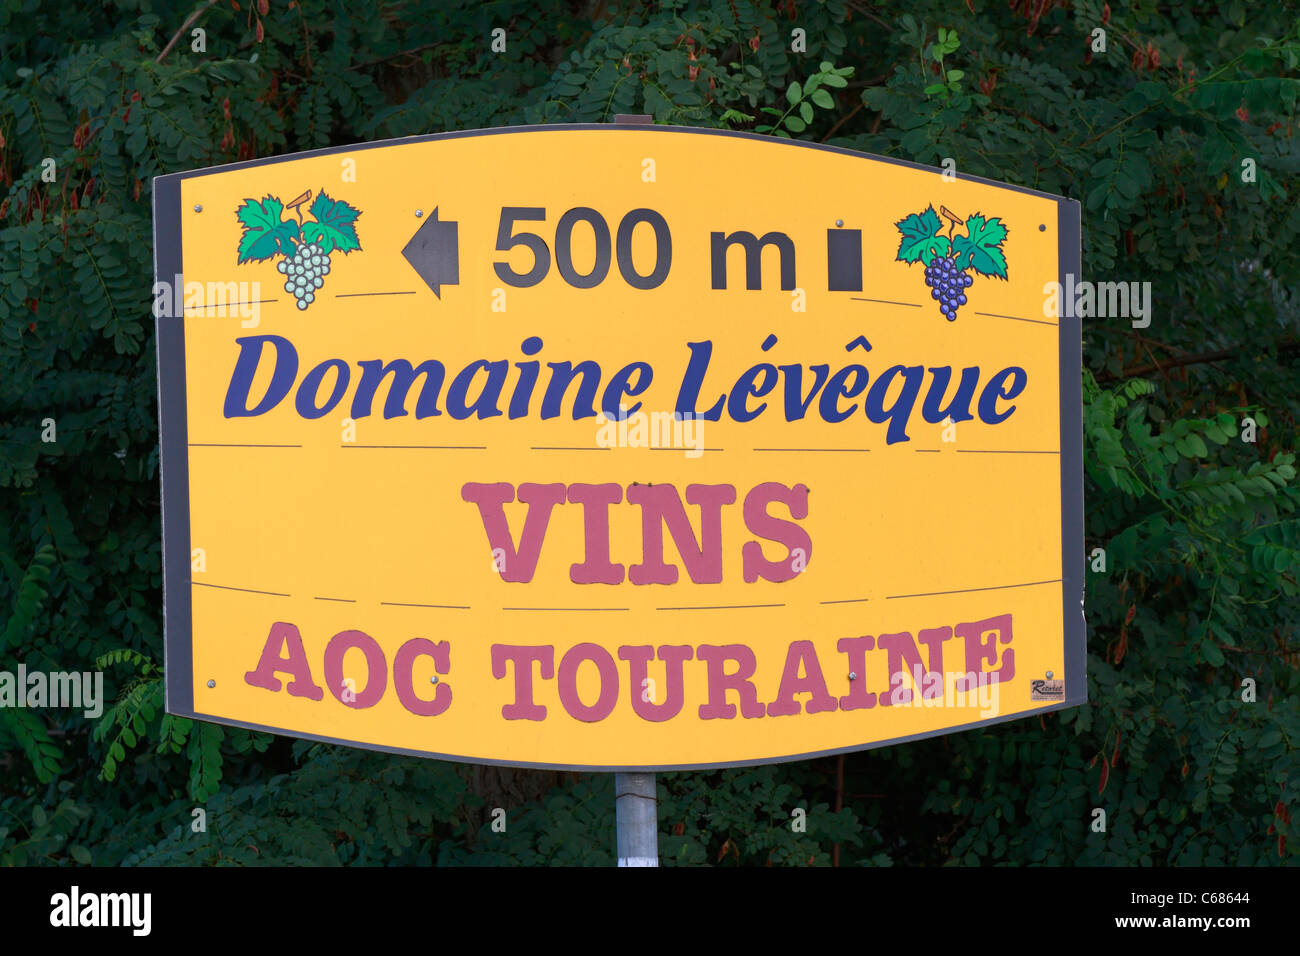 Wine barrel shape sign for vineyard Touraine Domaine Leveque at Noyers sur Cher in the Loire Valley, France. Stock Photo